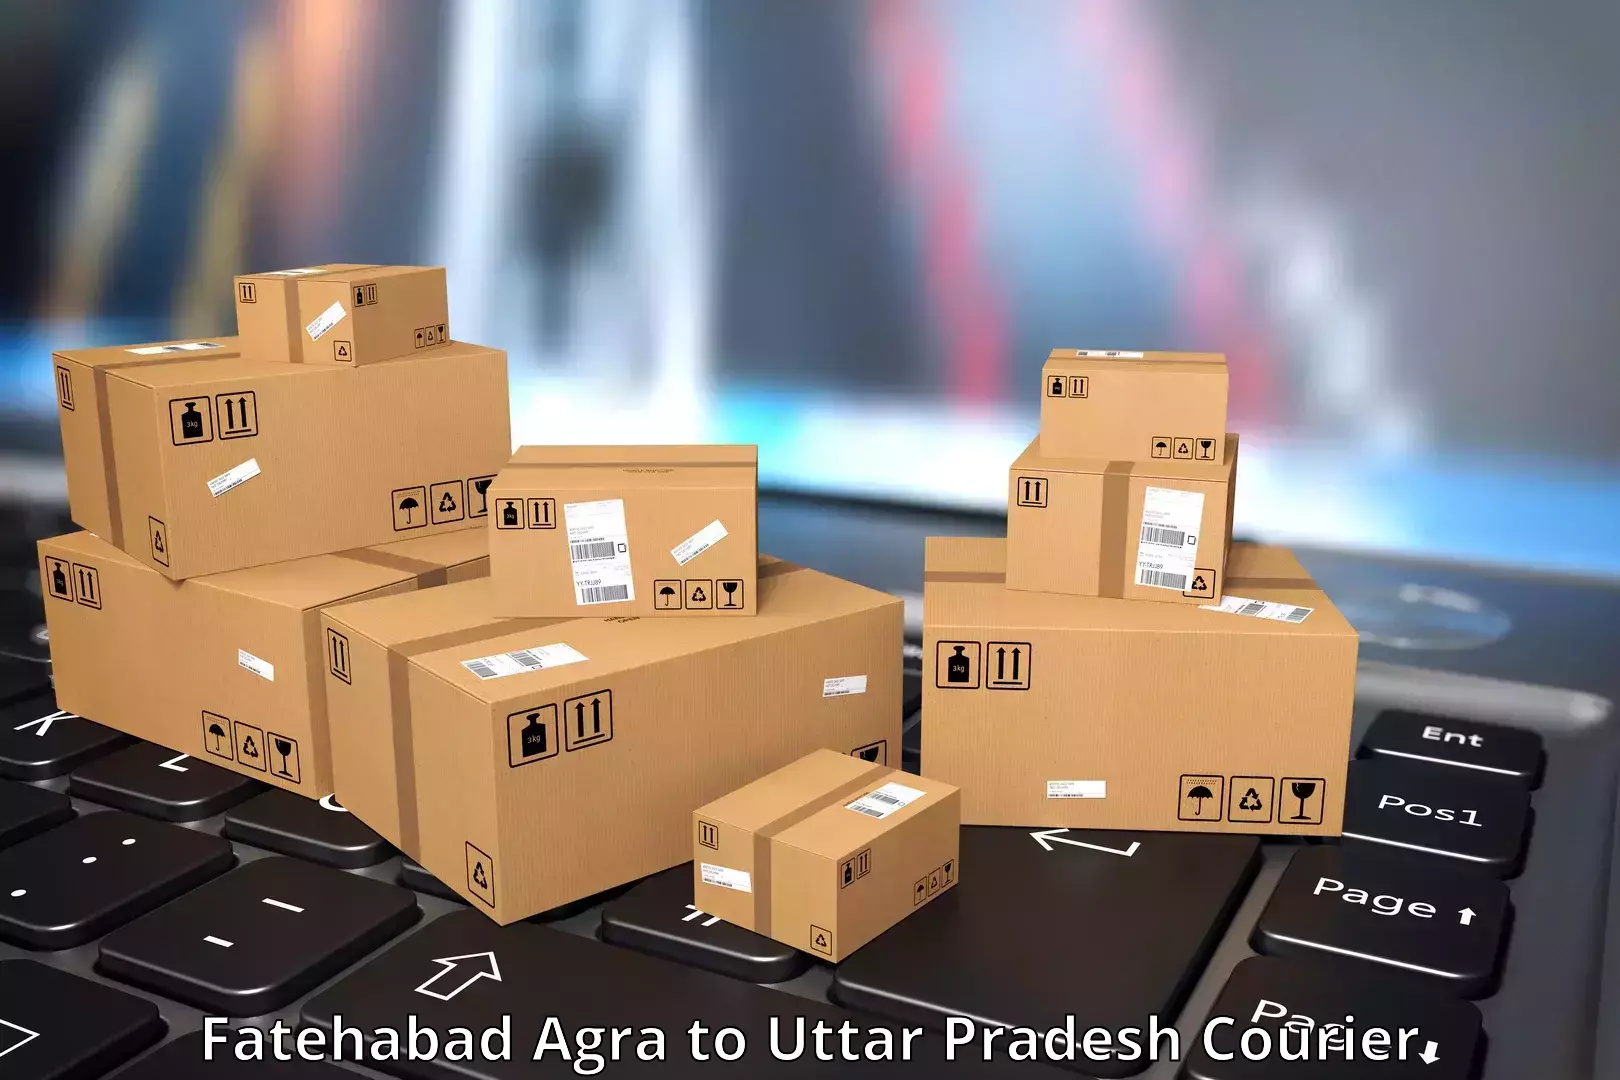 Express delivery capabilities Fatehabad Agra to Agra